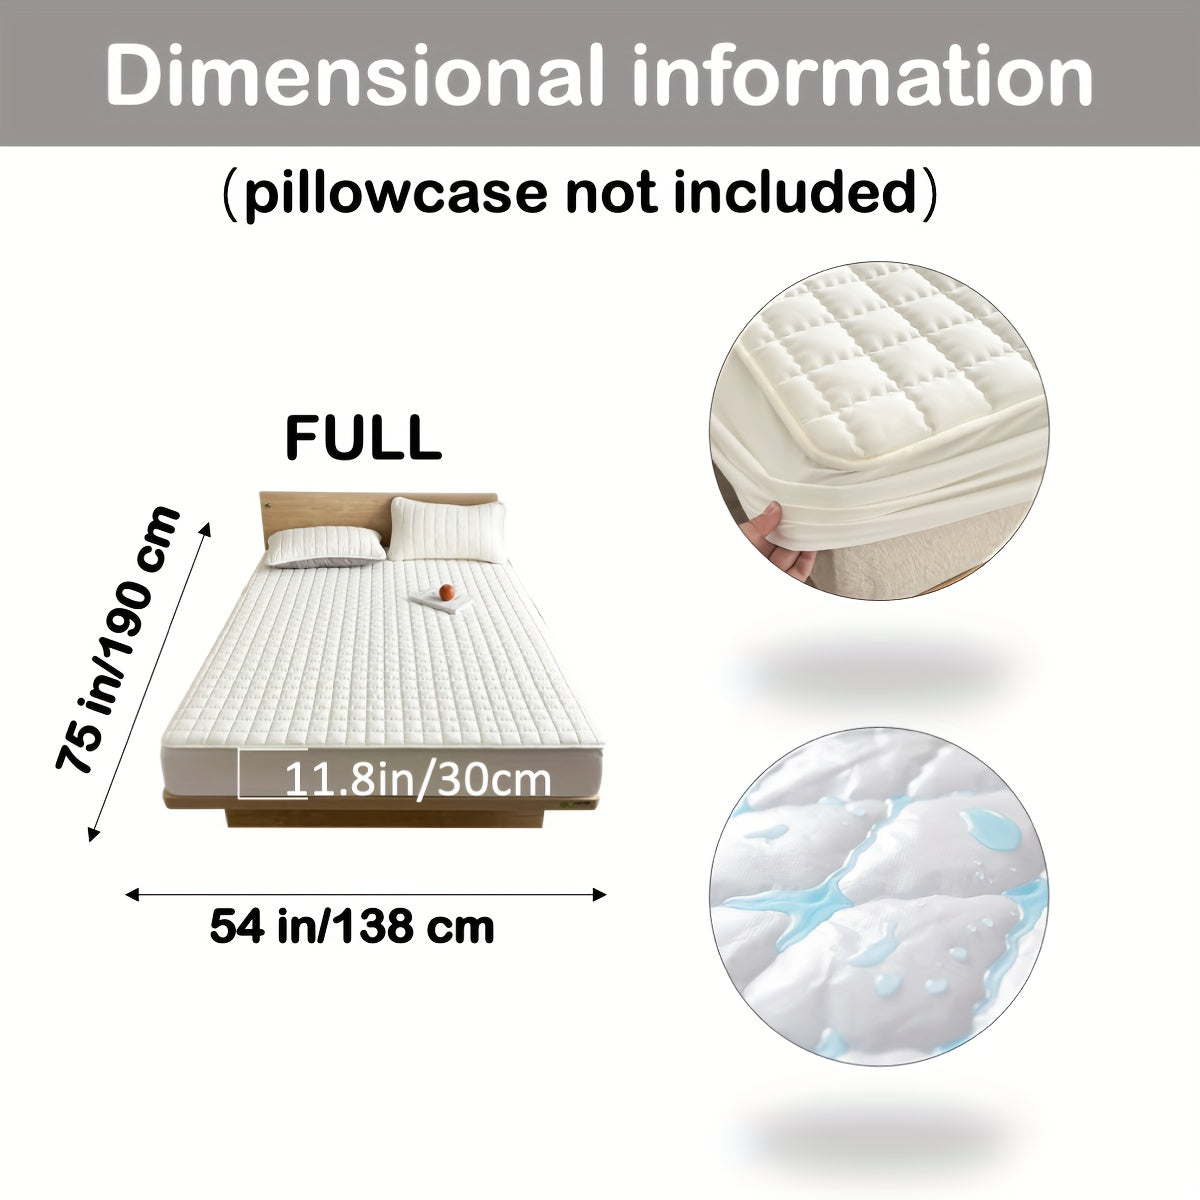 Dimensional information about Waterproof Quilted Deep Pocket Mattress Cover - Soft Comfort, Easy Care, Bedroom and Guest Room Essential